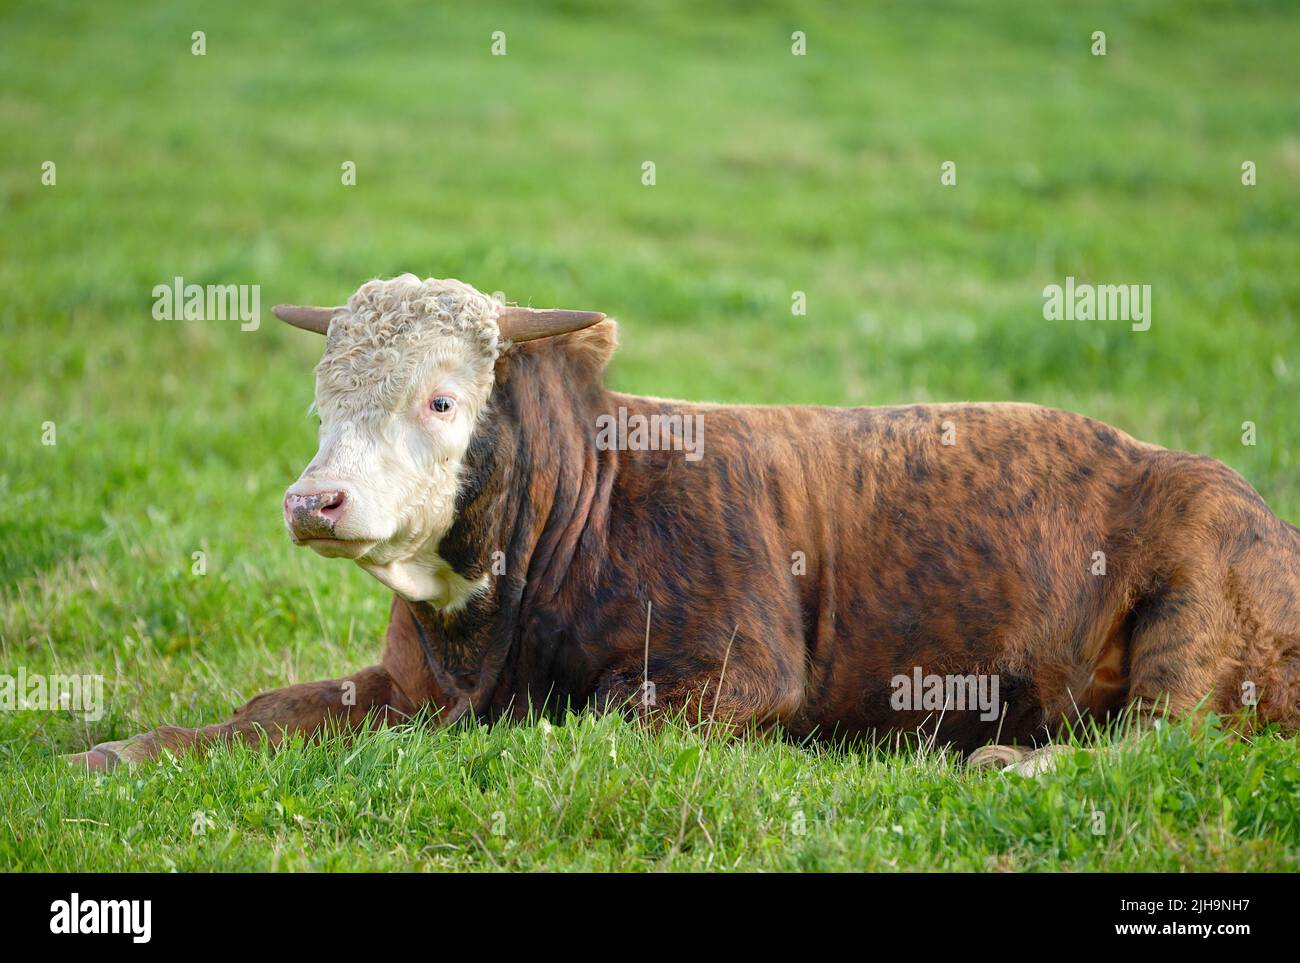 Landscape with animals in nature. One brown and white cow sitting on a green field in a rural countryside with copy space. Raising and breeding Stock Photo